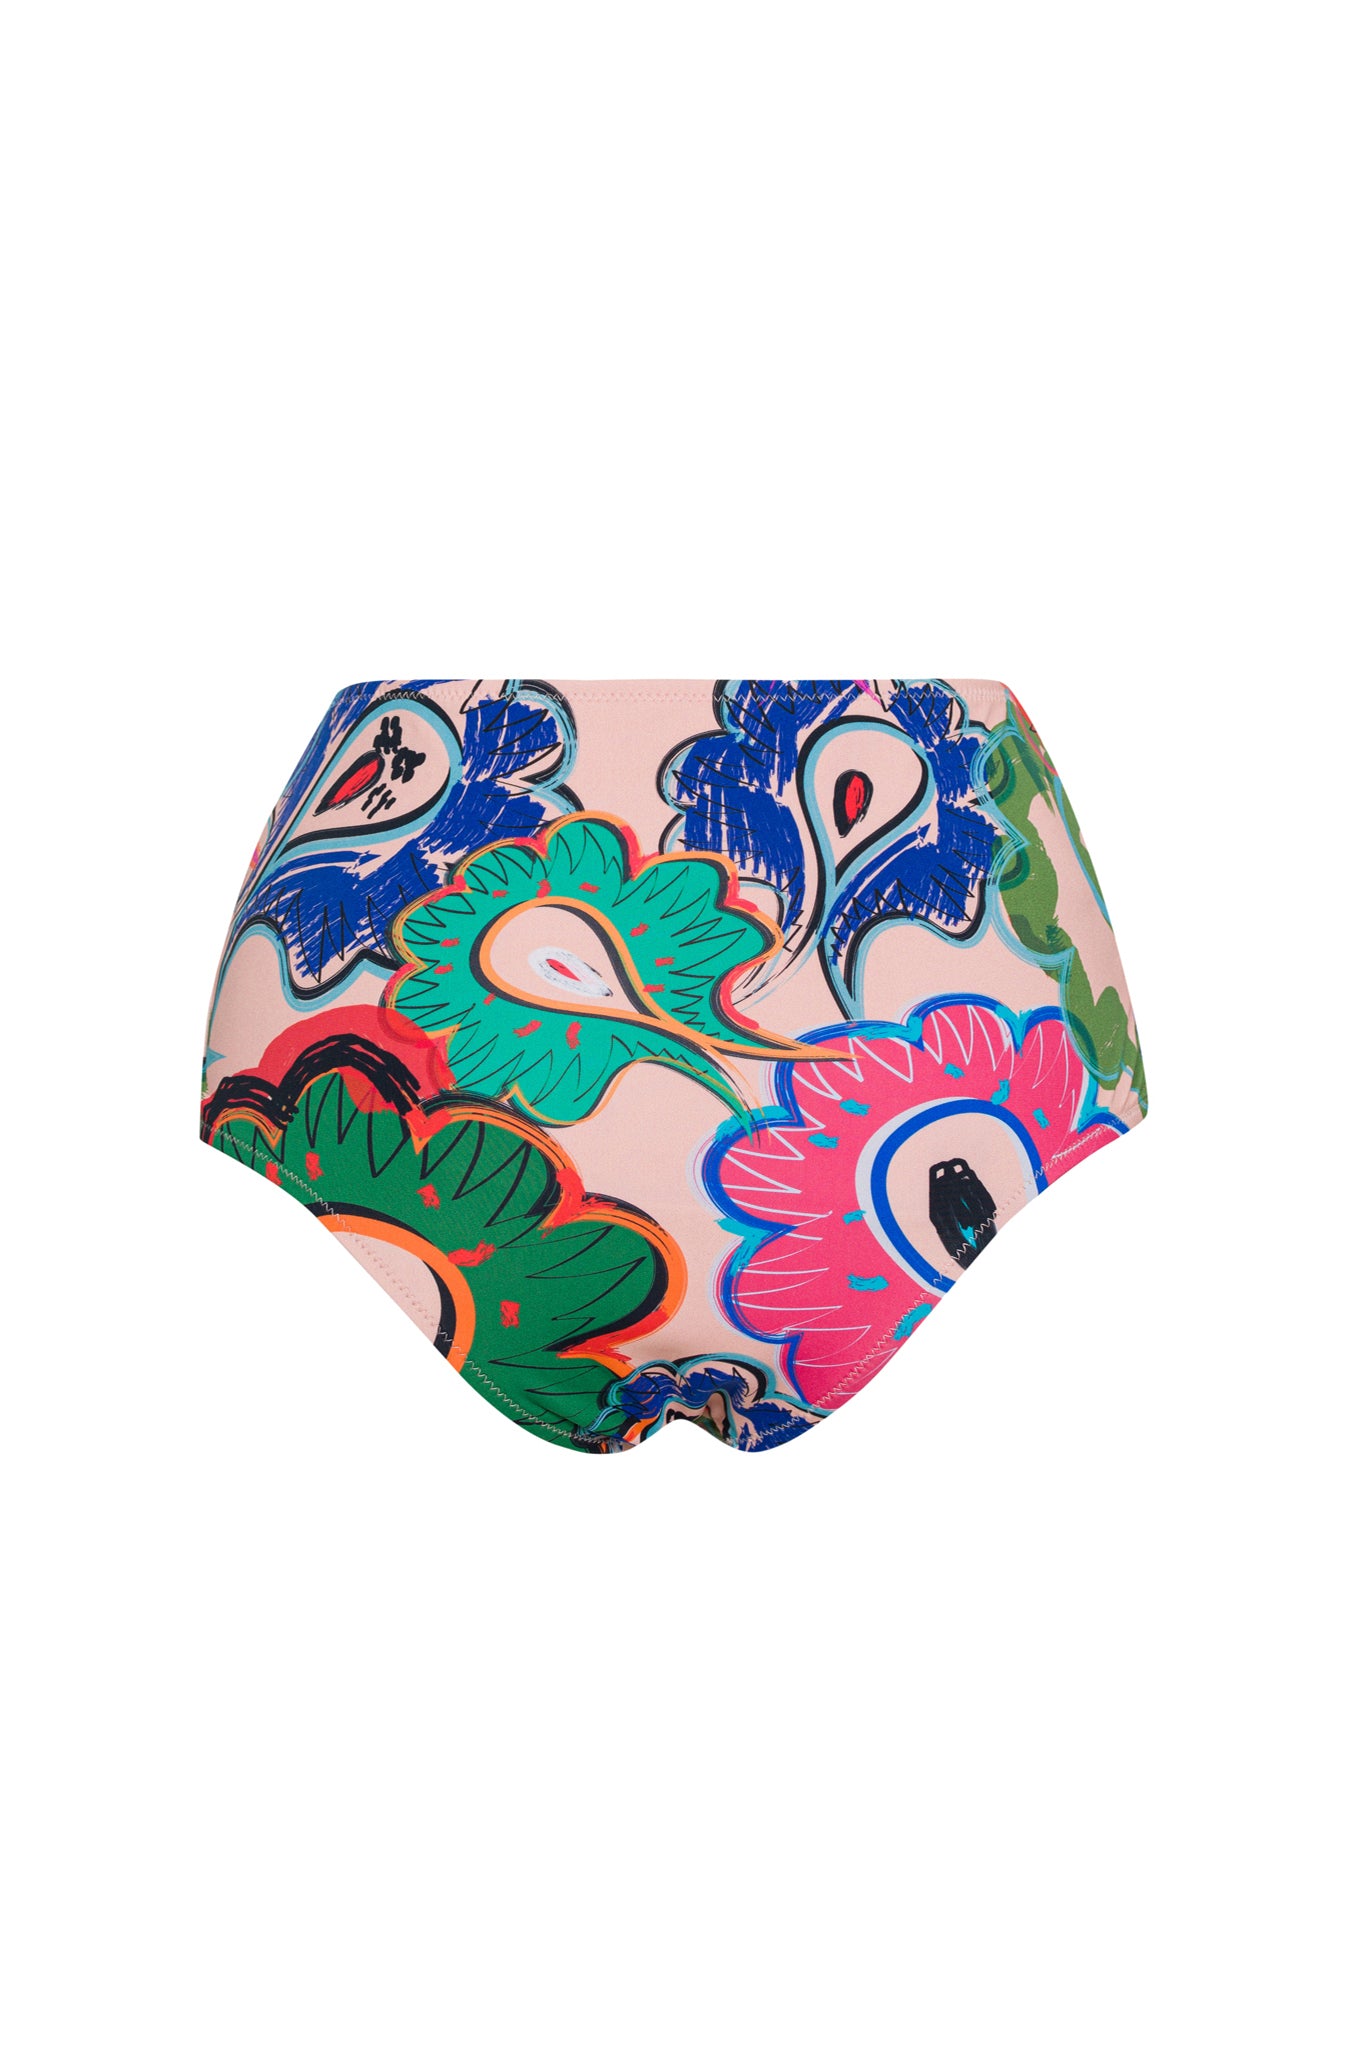 Ruched High Waist Bottom Paisley